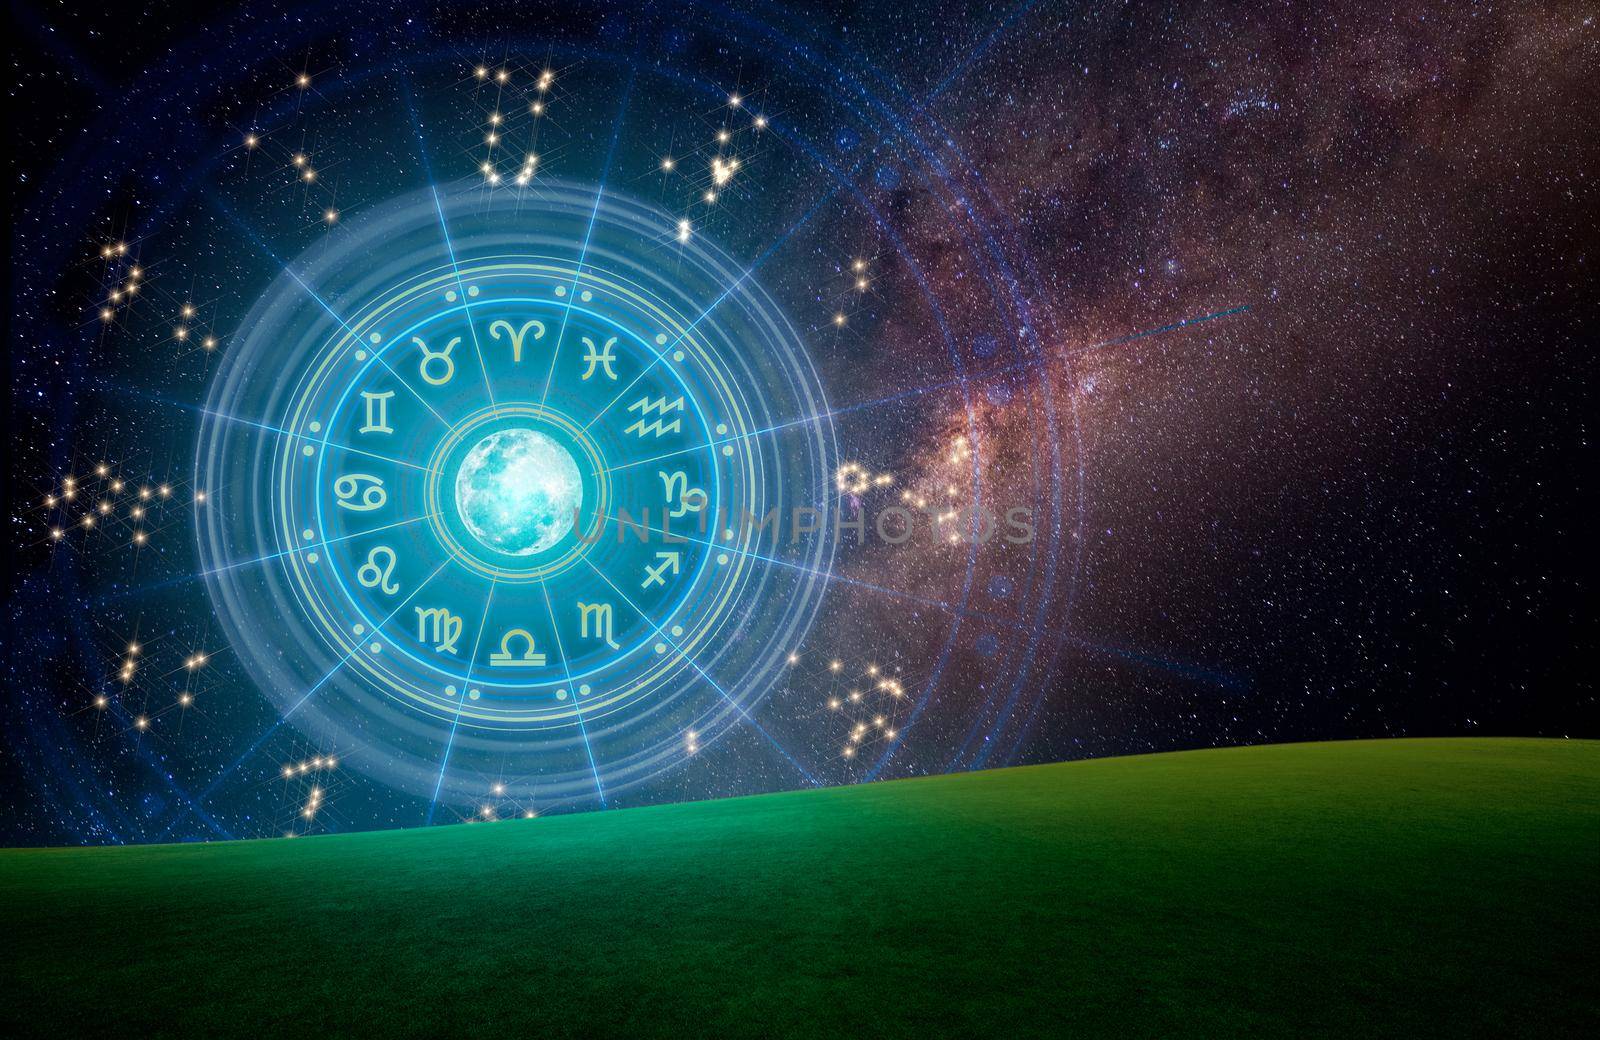 Astrological zodiac signs inside of horoscope circle. Astrology, knowledge of stars in the sky over the milky way and moon.